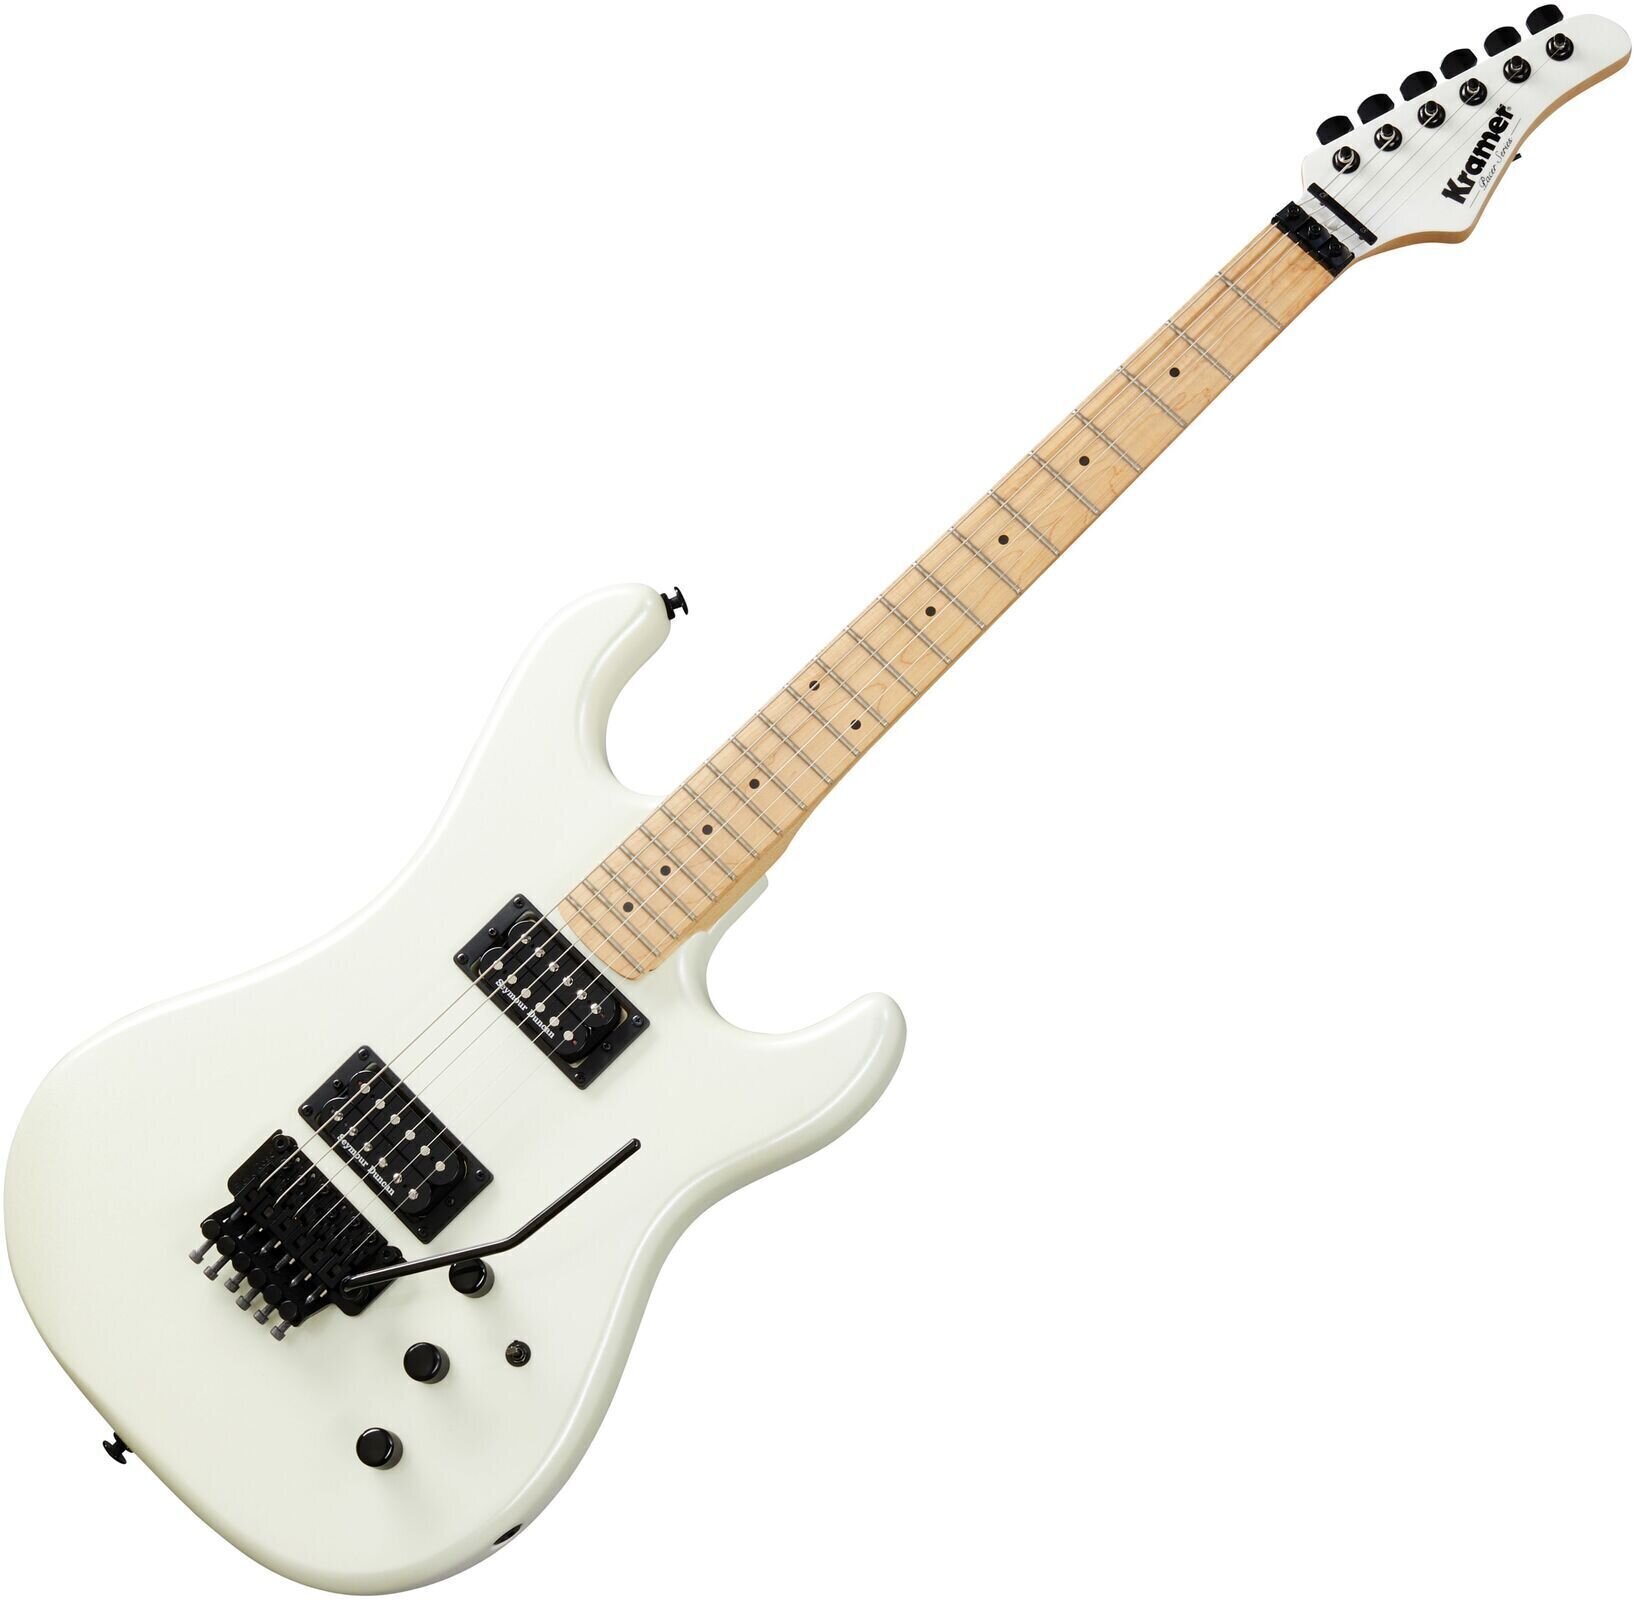 Electric guitar Kramer Pacer Vintage Pearl White (Just unboxed)